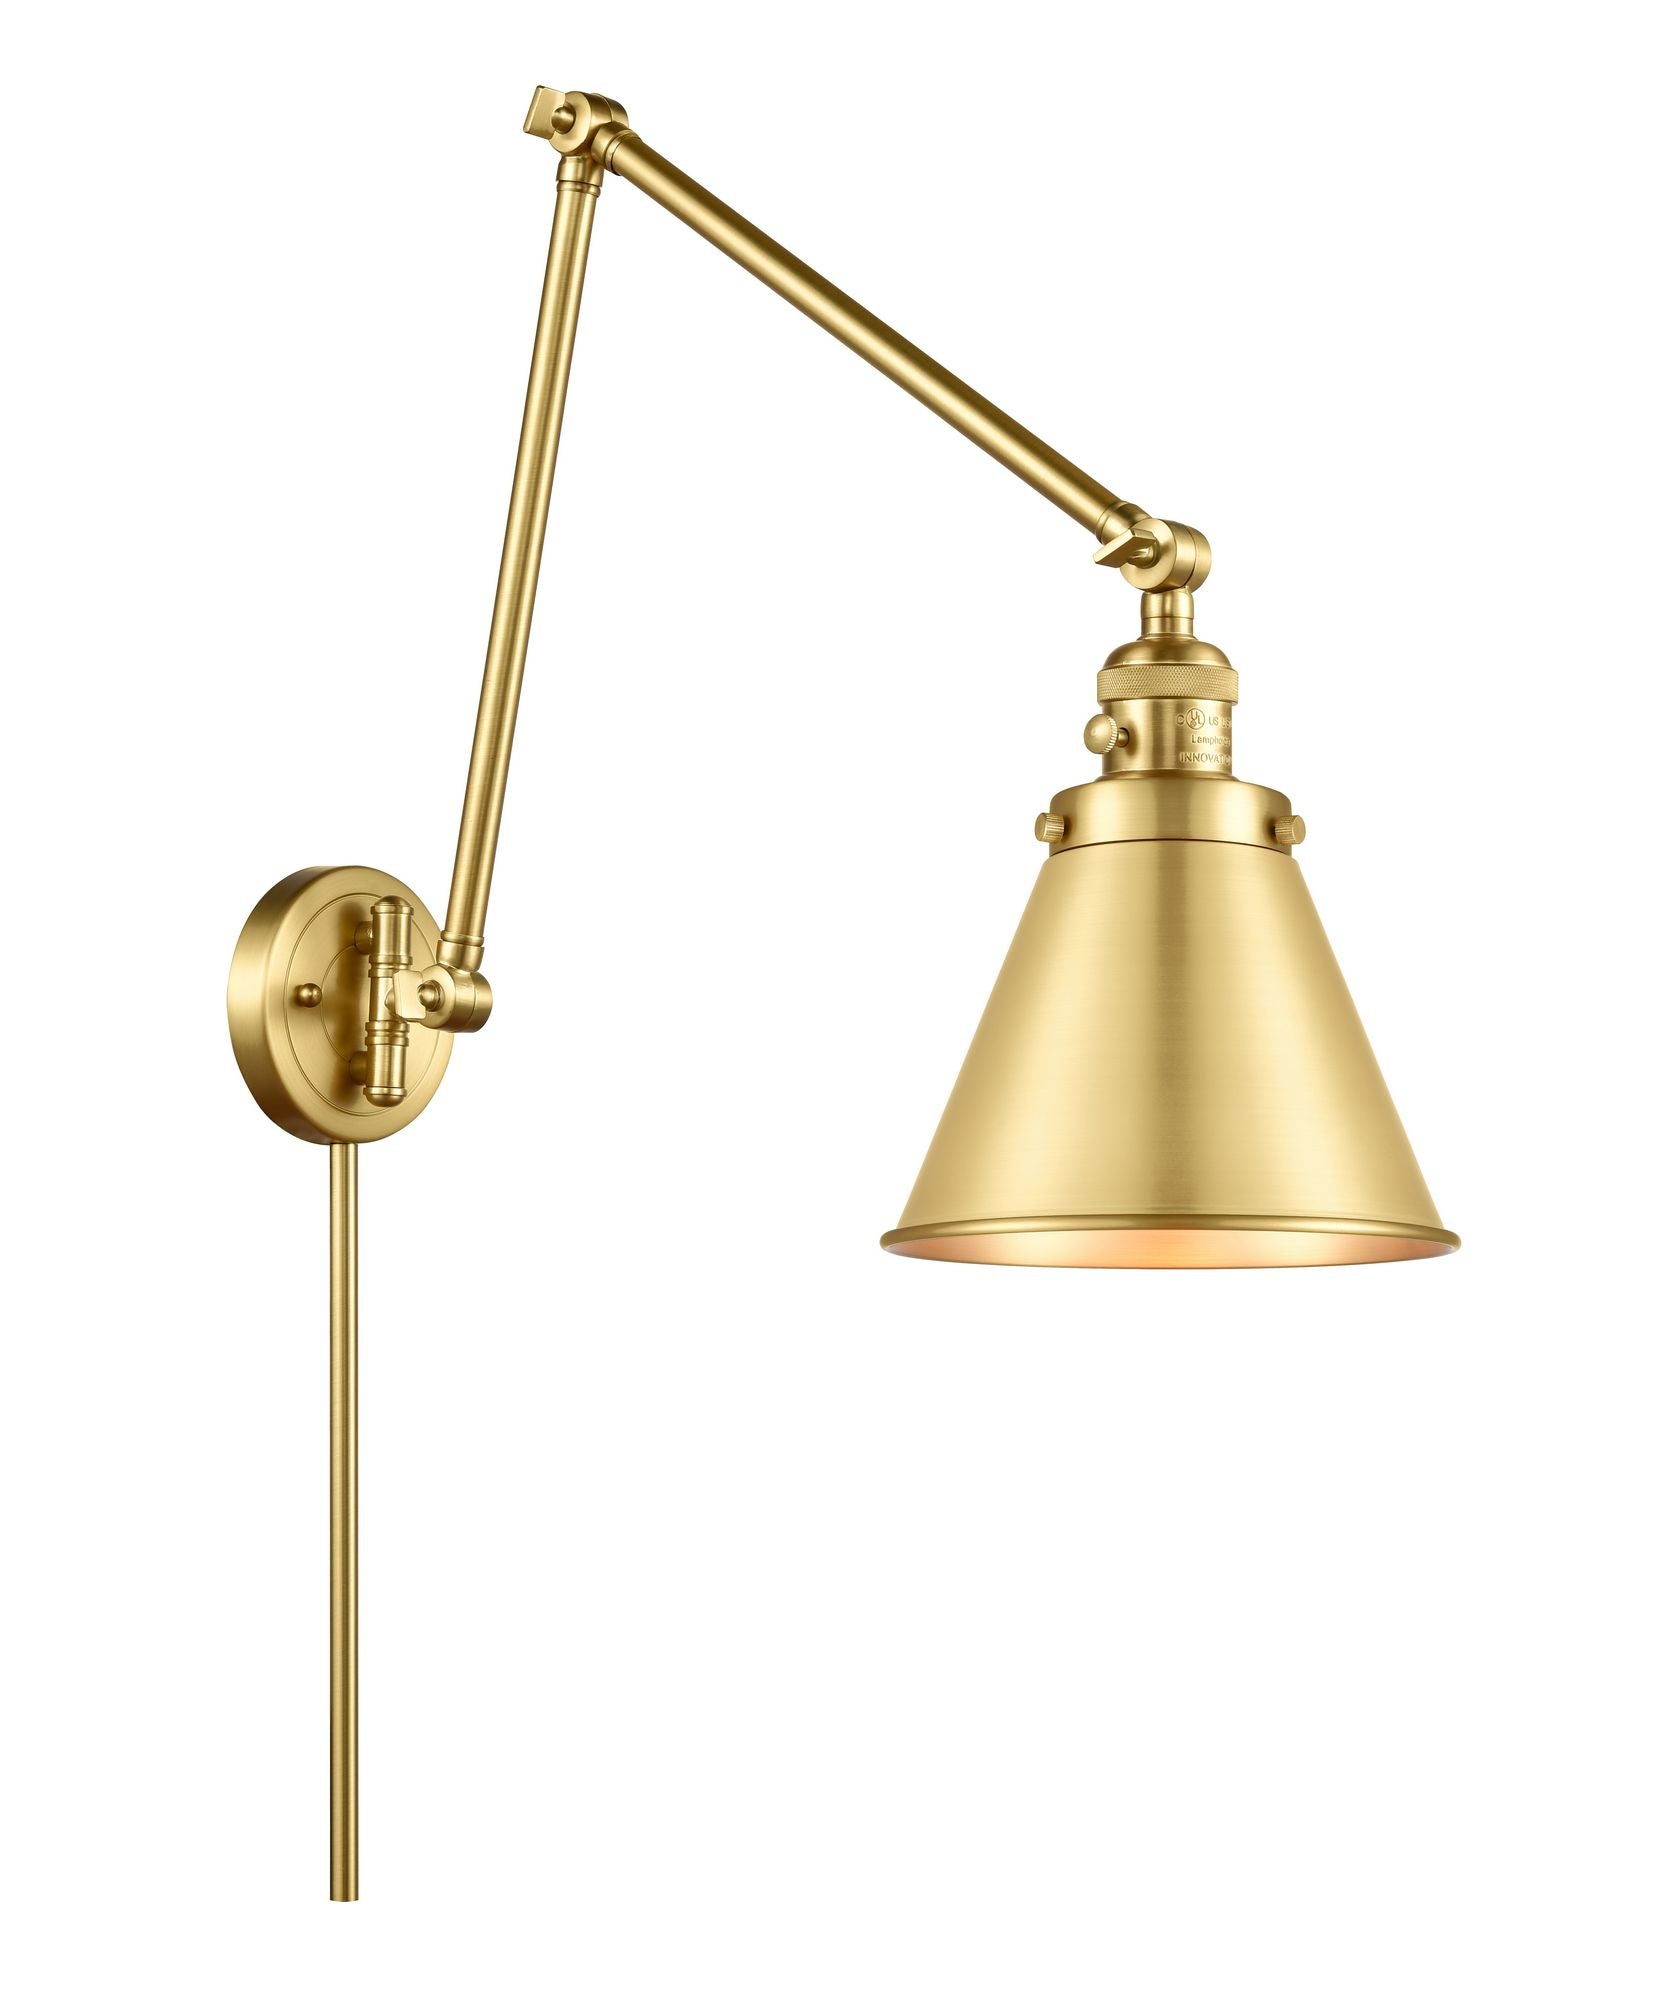 1-Light 8" Satin Gold Appalachian Swing Arm With Switch - Cone Satin Gold Glass - Incandesent Or LED Bulbs